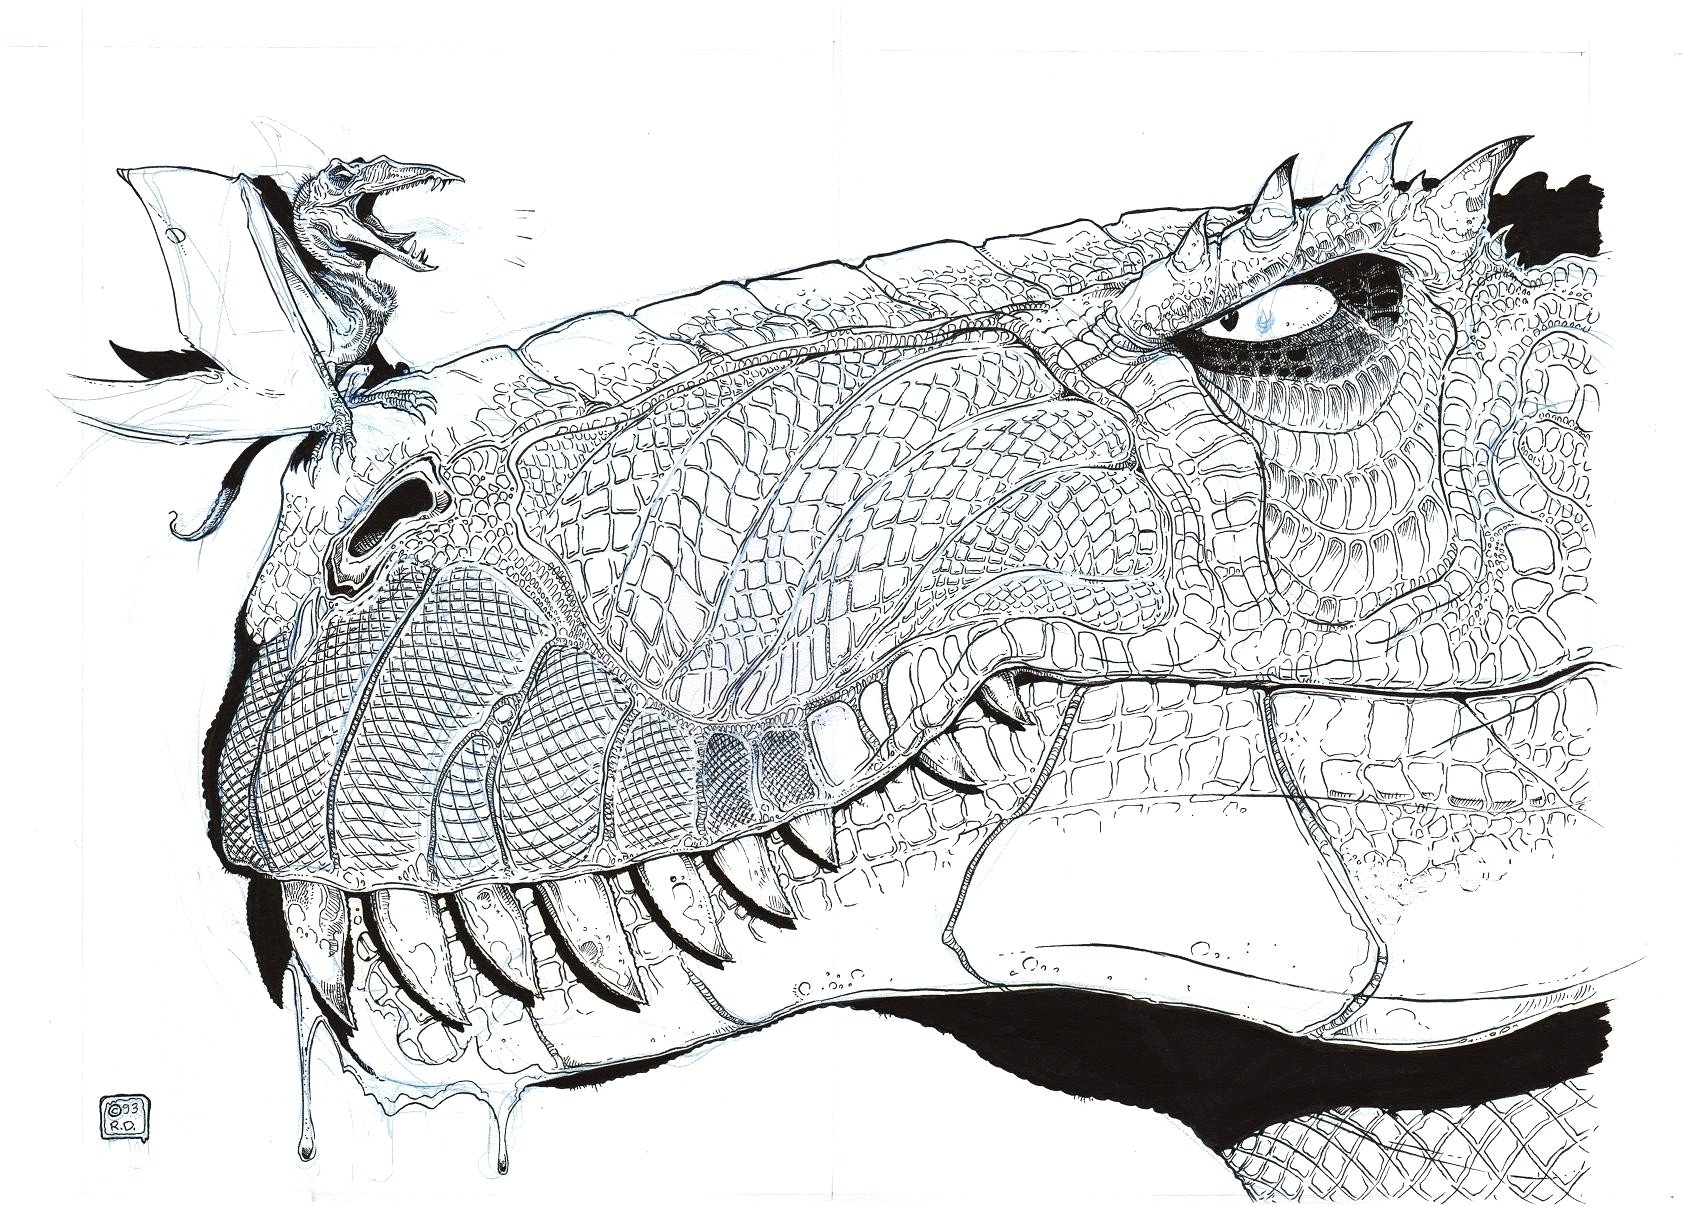 Reptile Illustrations and Clip Art. 108,261 Reptile royalty free  illustrations, drawings and graphics available to search from thousands of  vector EPS clipart producers.